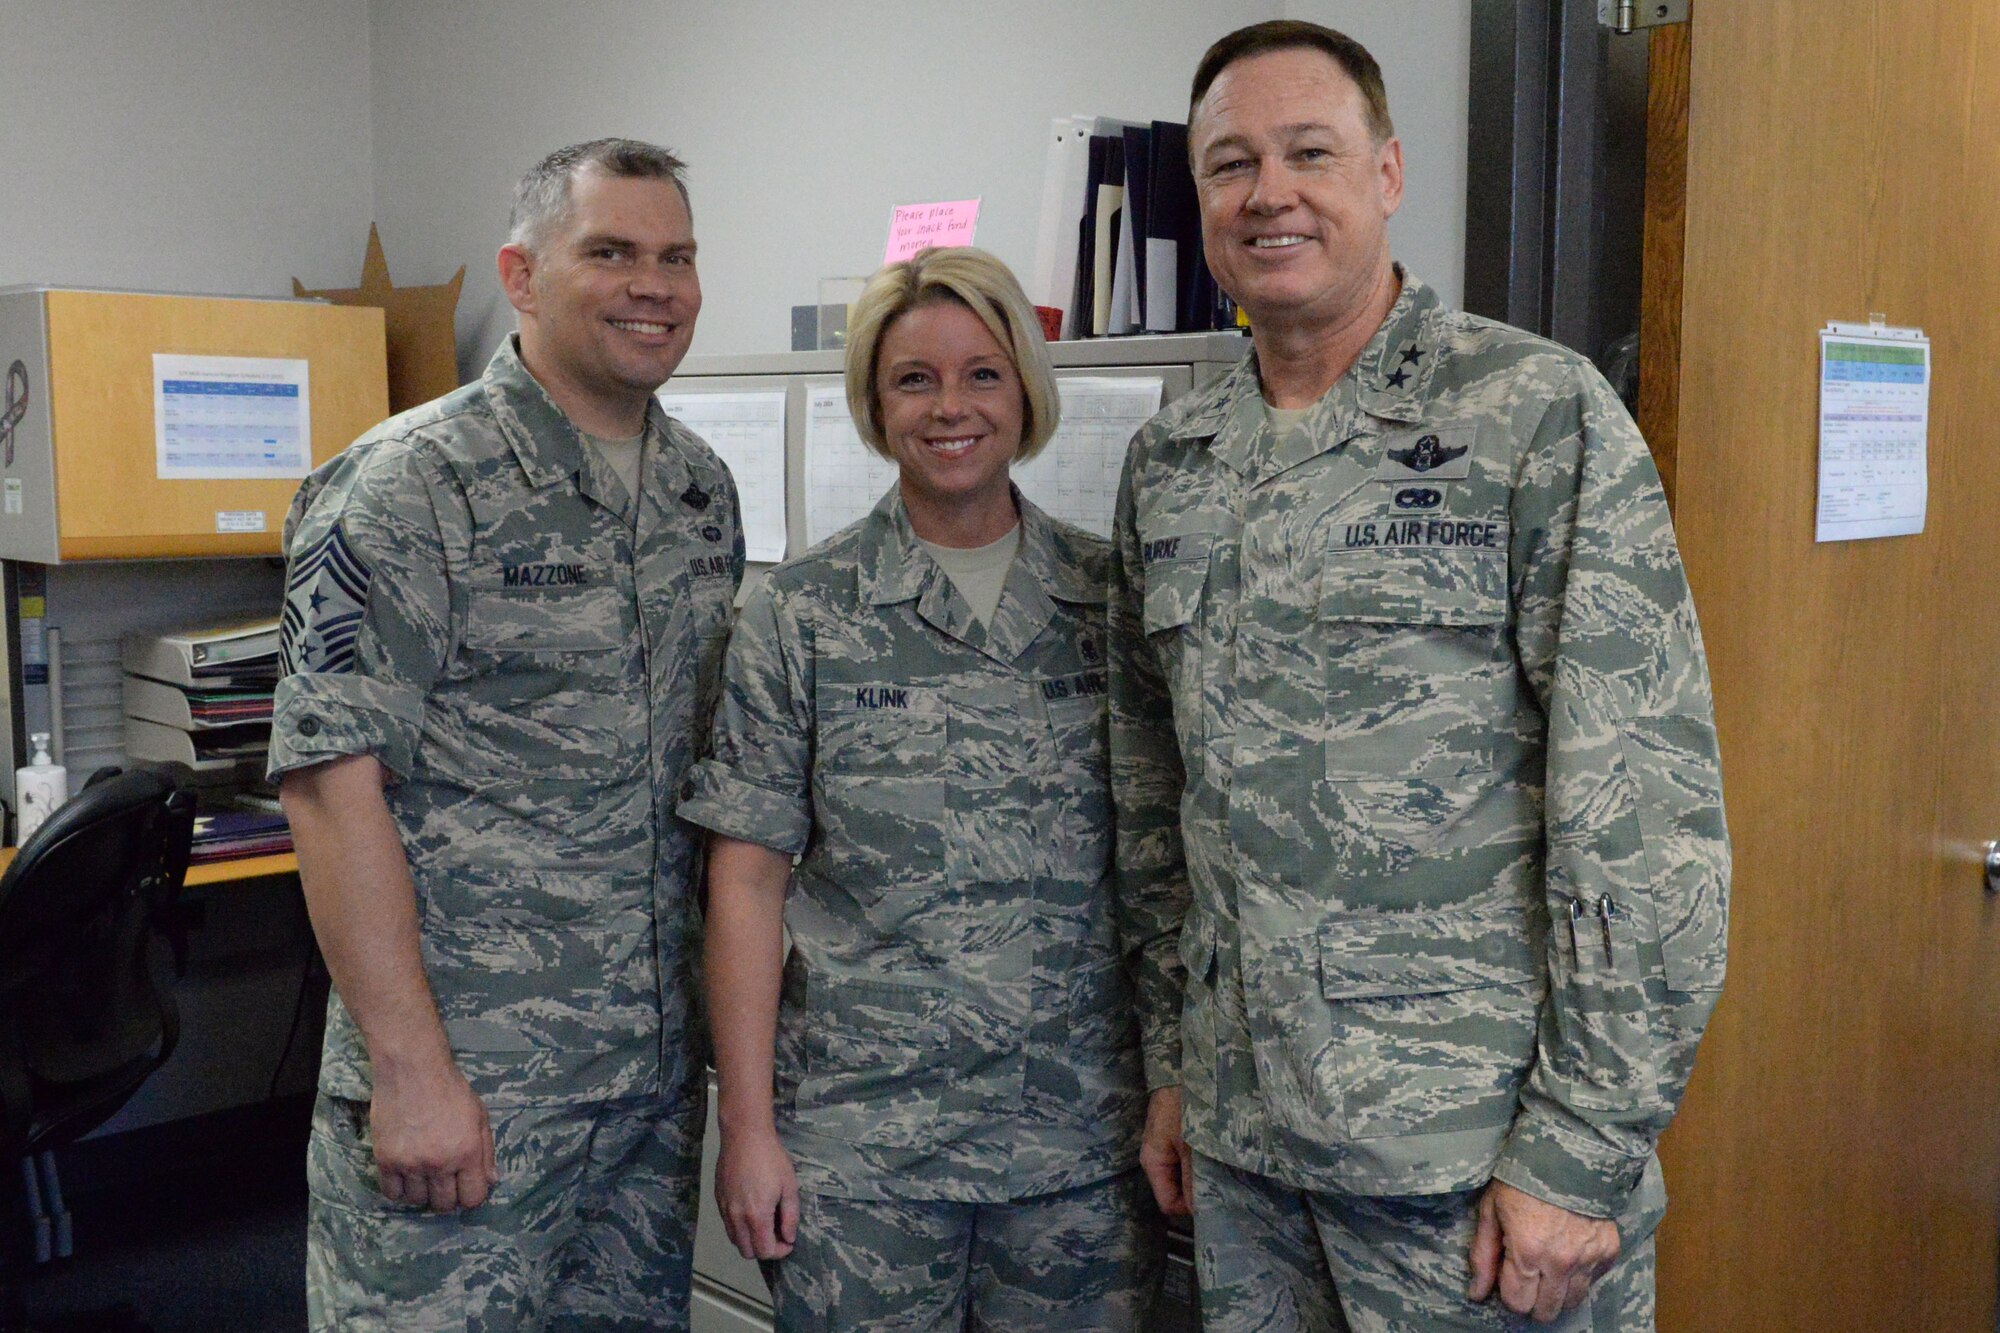 Air Force District of Washington Commander Maj. Gen. Darryl Burke, Air Force District of Washington Command Chief Master Sgt. Tommy Mazzone, and Senior Master Sgt. Jennifer Klink pose for a photo op in the dental clinic on Joint Base Anacostia-Bolling, Washington D.C., June 9, 2016. Klink was recognized by Gen. Burke for her efforts in making 2015 AFDW Annual Awards banquet a memorable event.